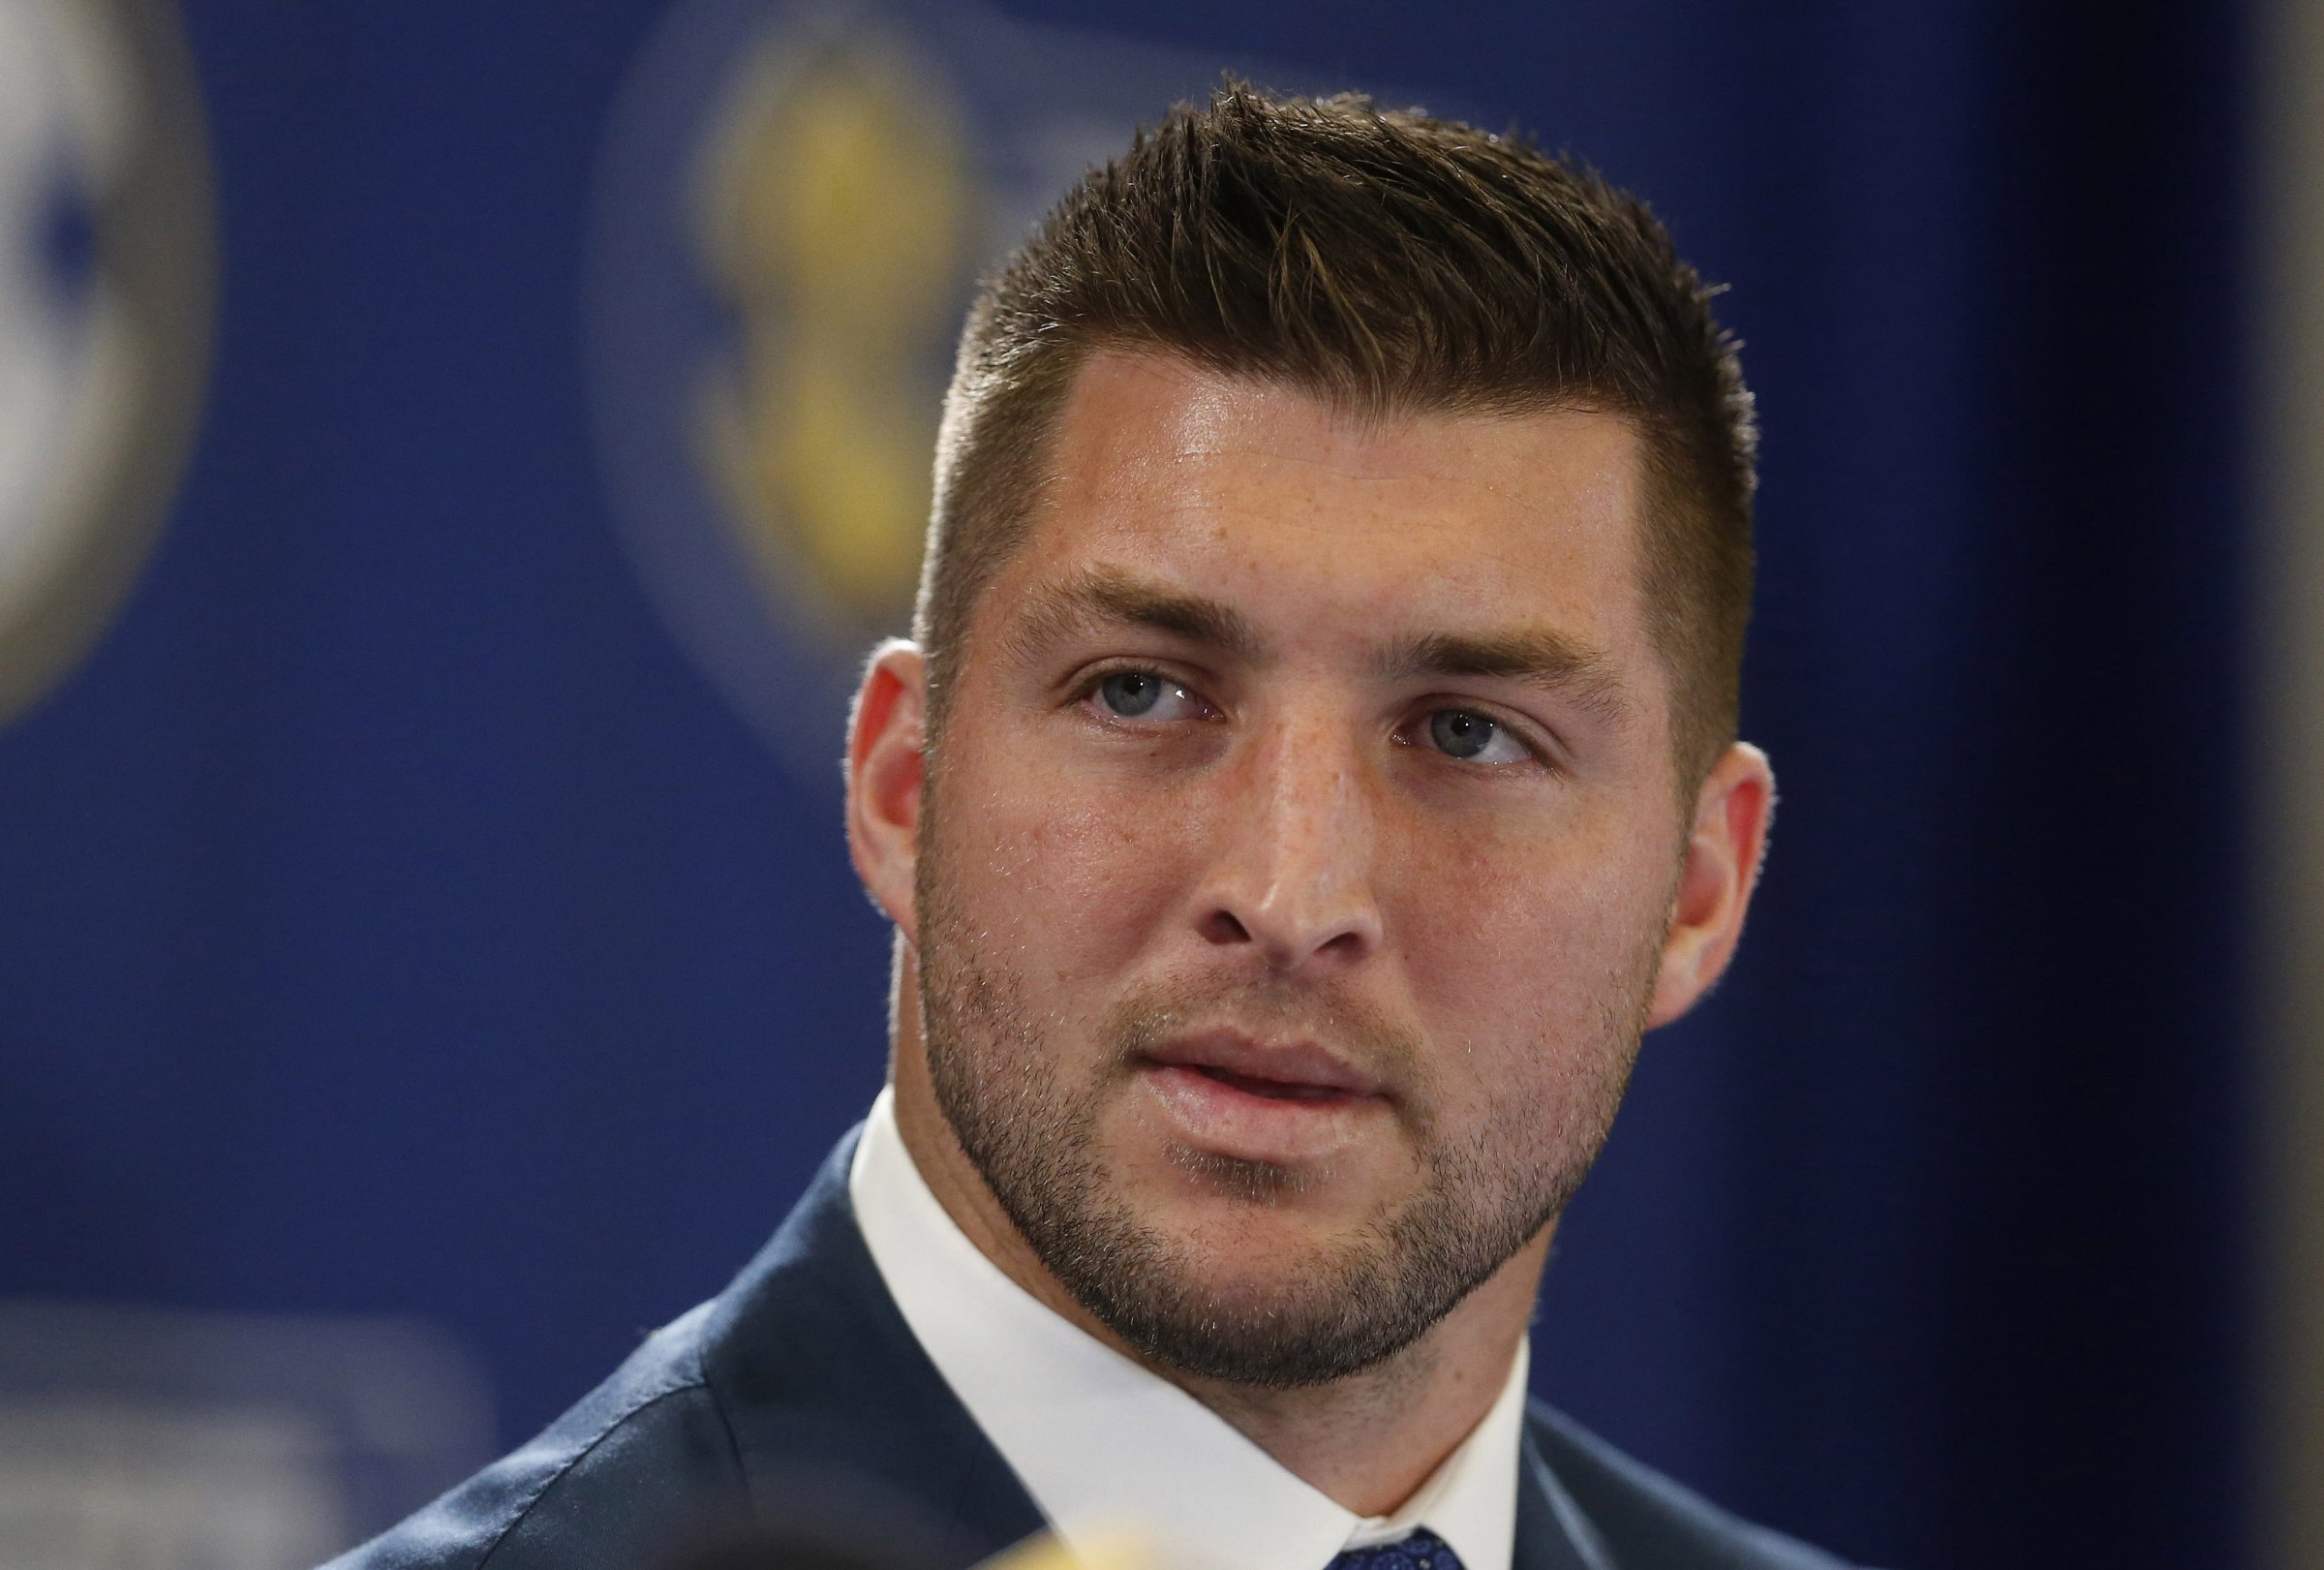 Tim Tebow speaks during a television broadcast in Atlanta on Dec. 5, 2014.